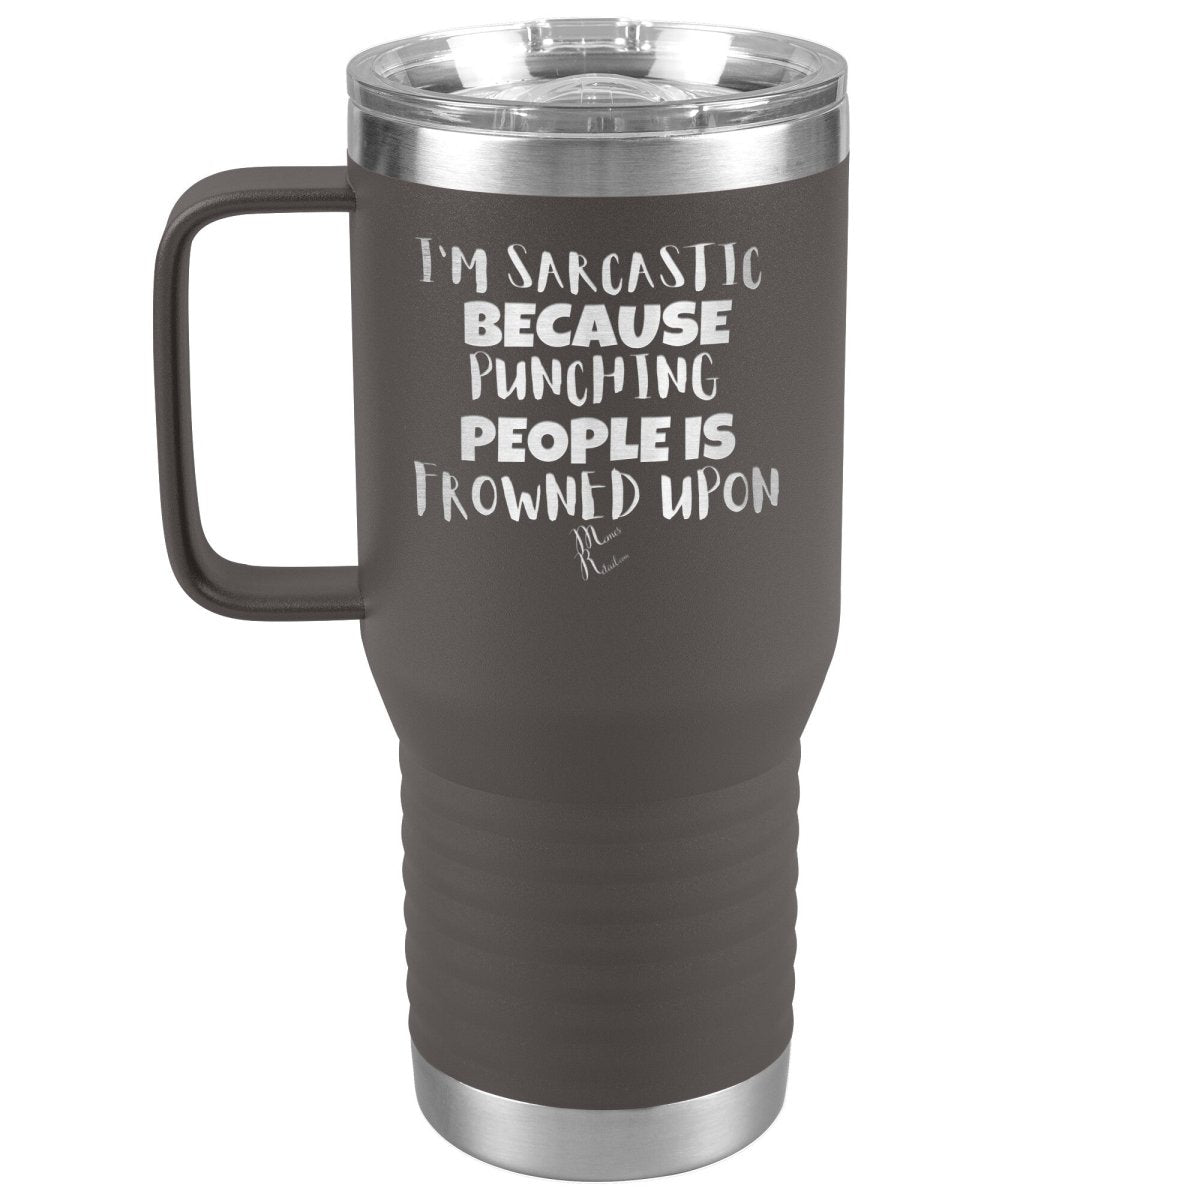 I'm Sarcastic Because Punching People is Frowned Upon Tumblers, 20oz Travel Tumbler / Pewter - MemesRetail.com